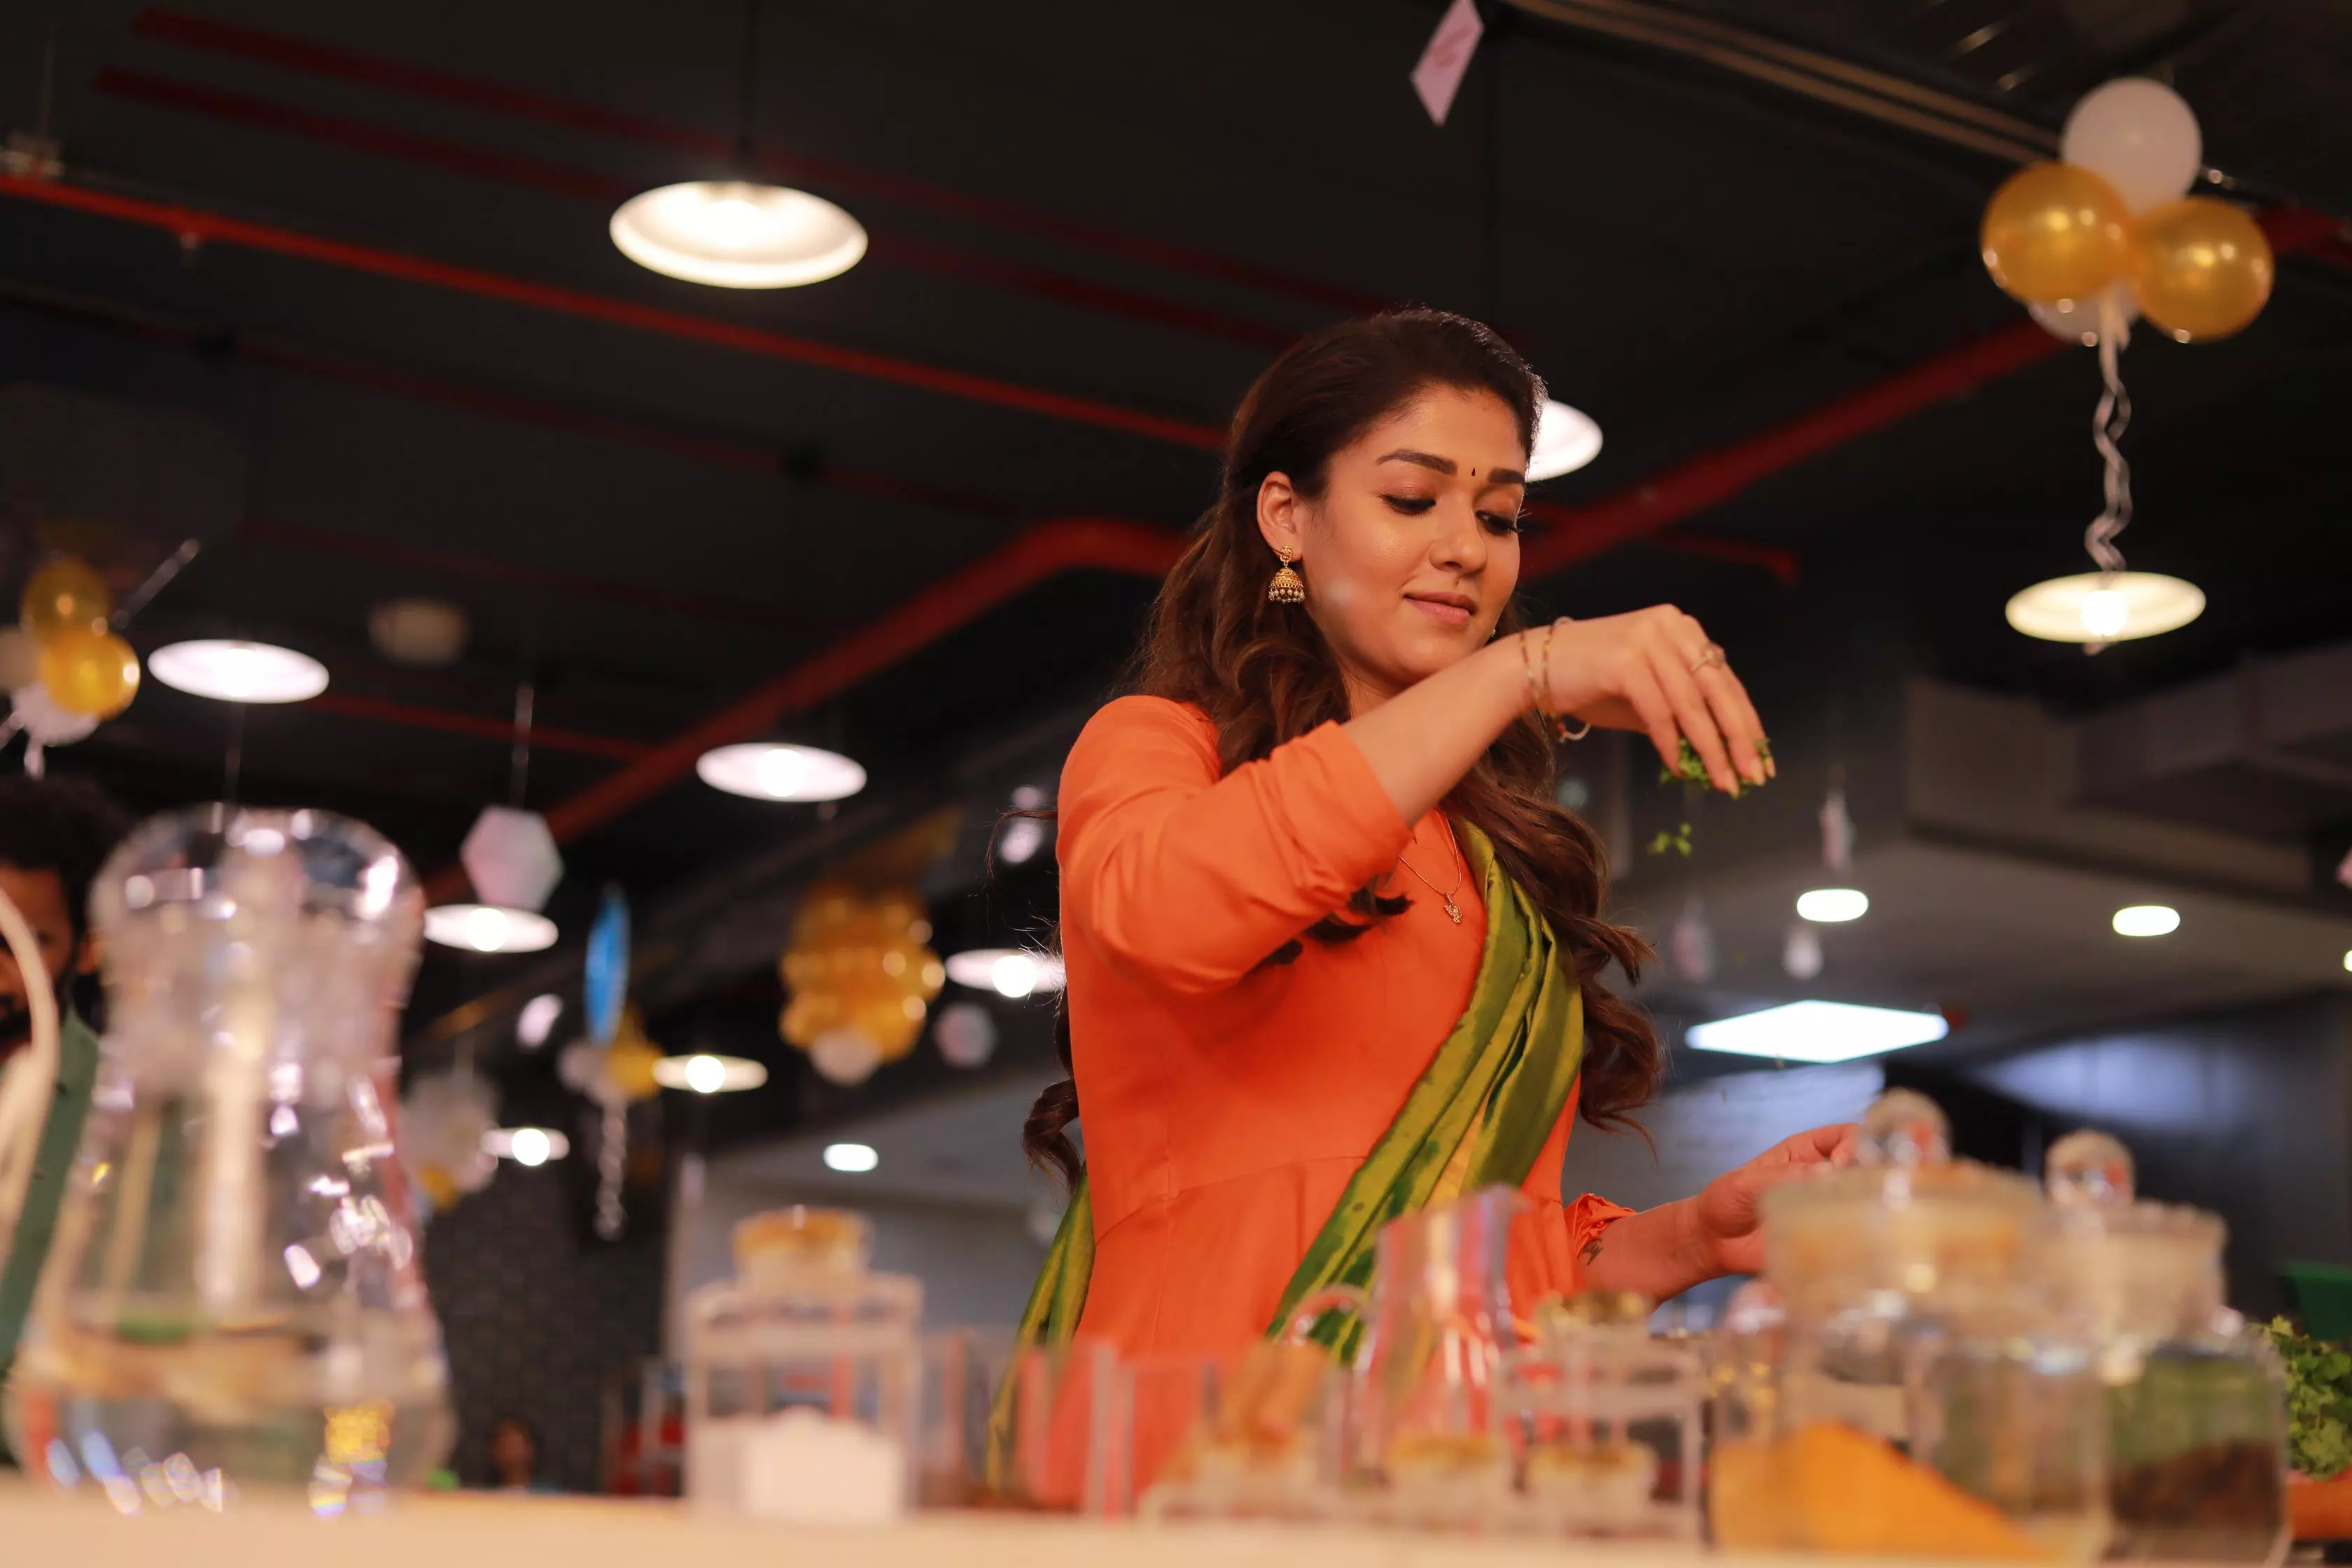 Annapoorani review: Nayanthara cooks up a charming but predictable fare